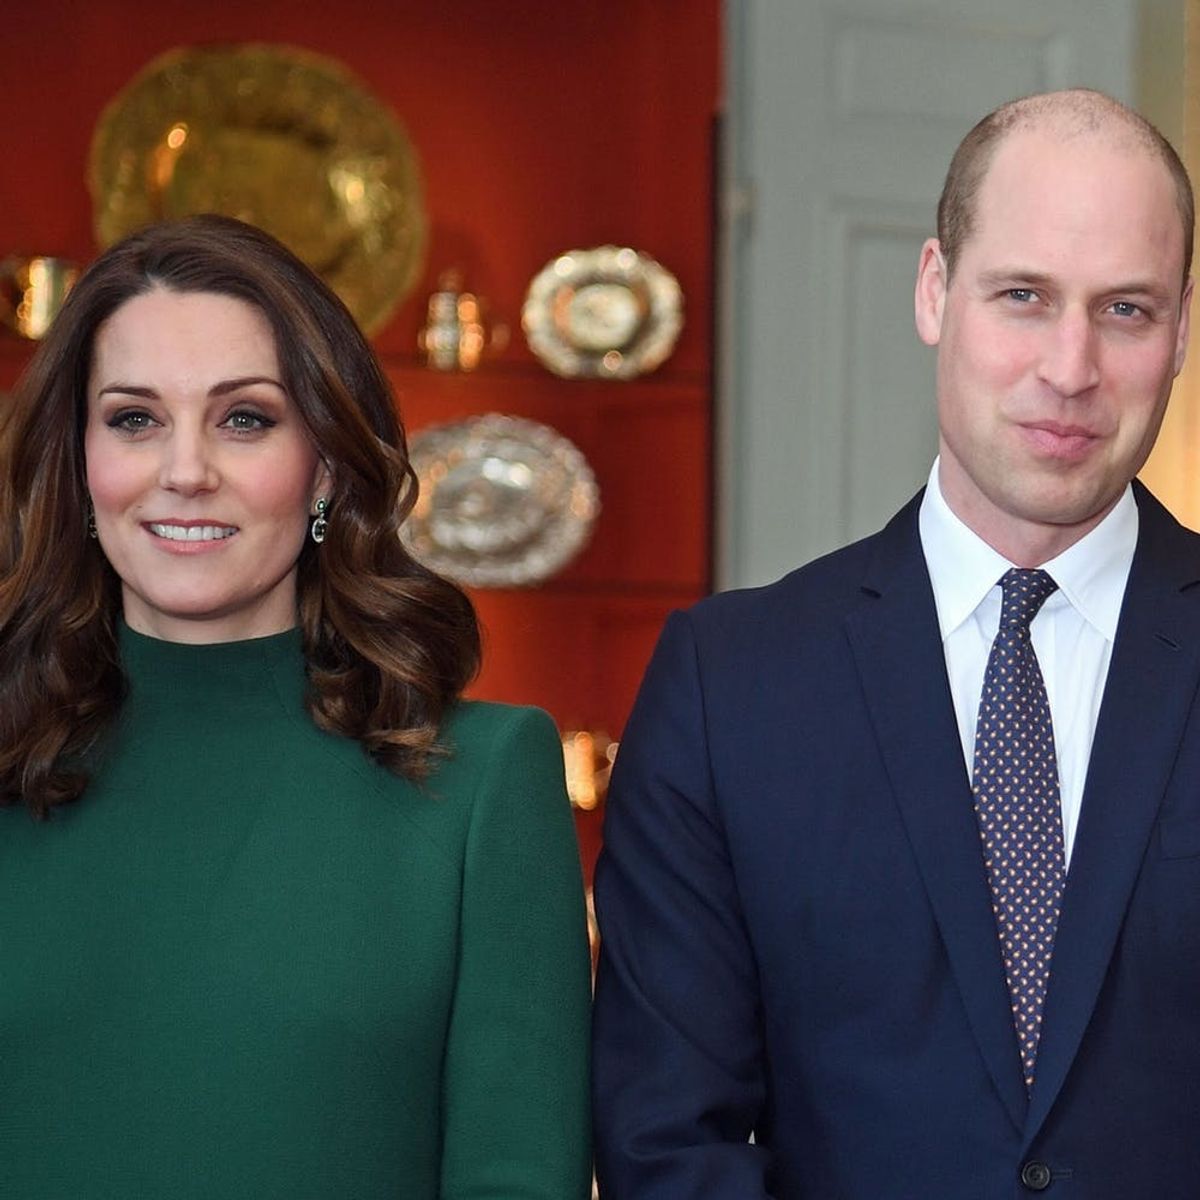 Kate Middleton Just Revealed She and Prince William Have IKEA Furniture in the Palace